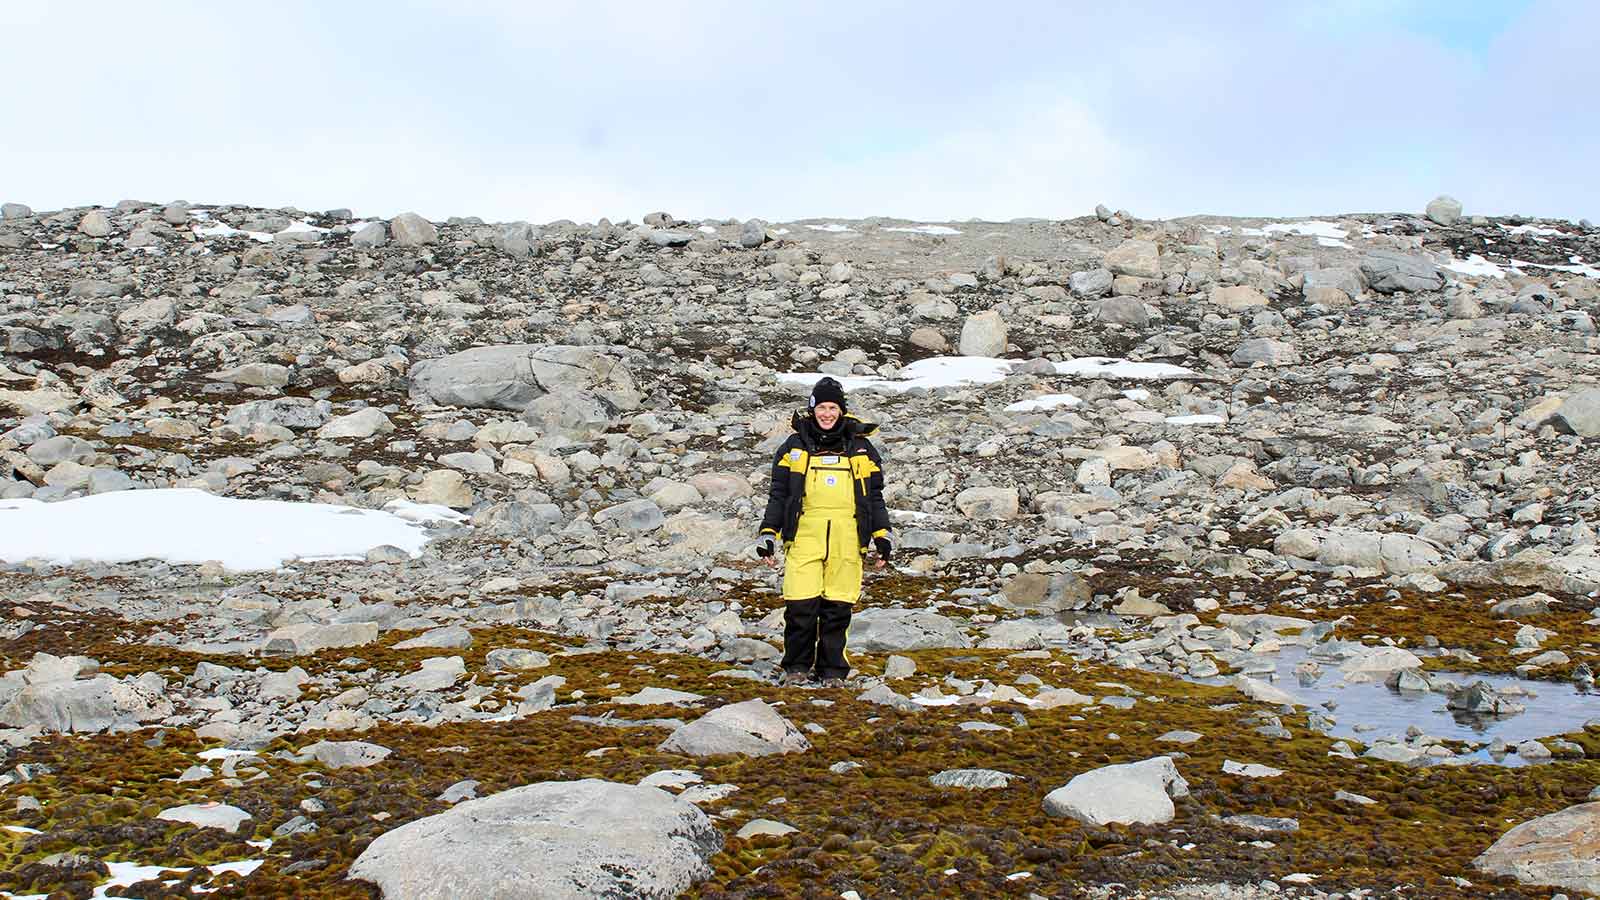 Professor Sharon Robinson is standing in front of moss, rocks and ice in Antarctica. She is wearing black and yellow protective thermals, beanie and gloves and smiling.